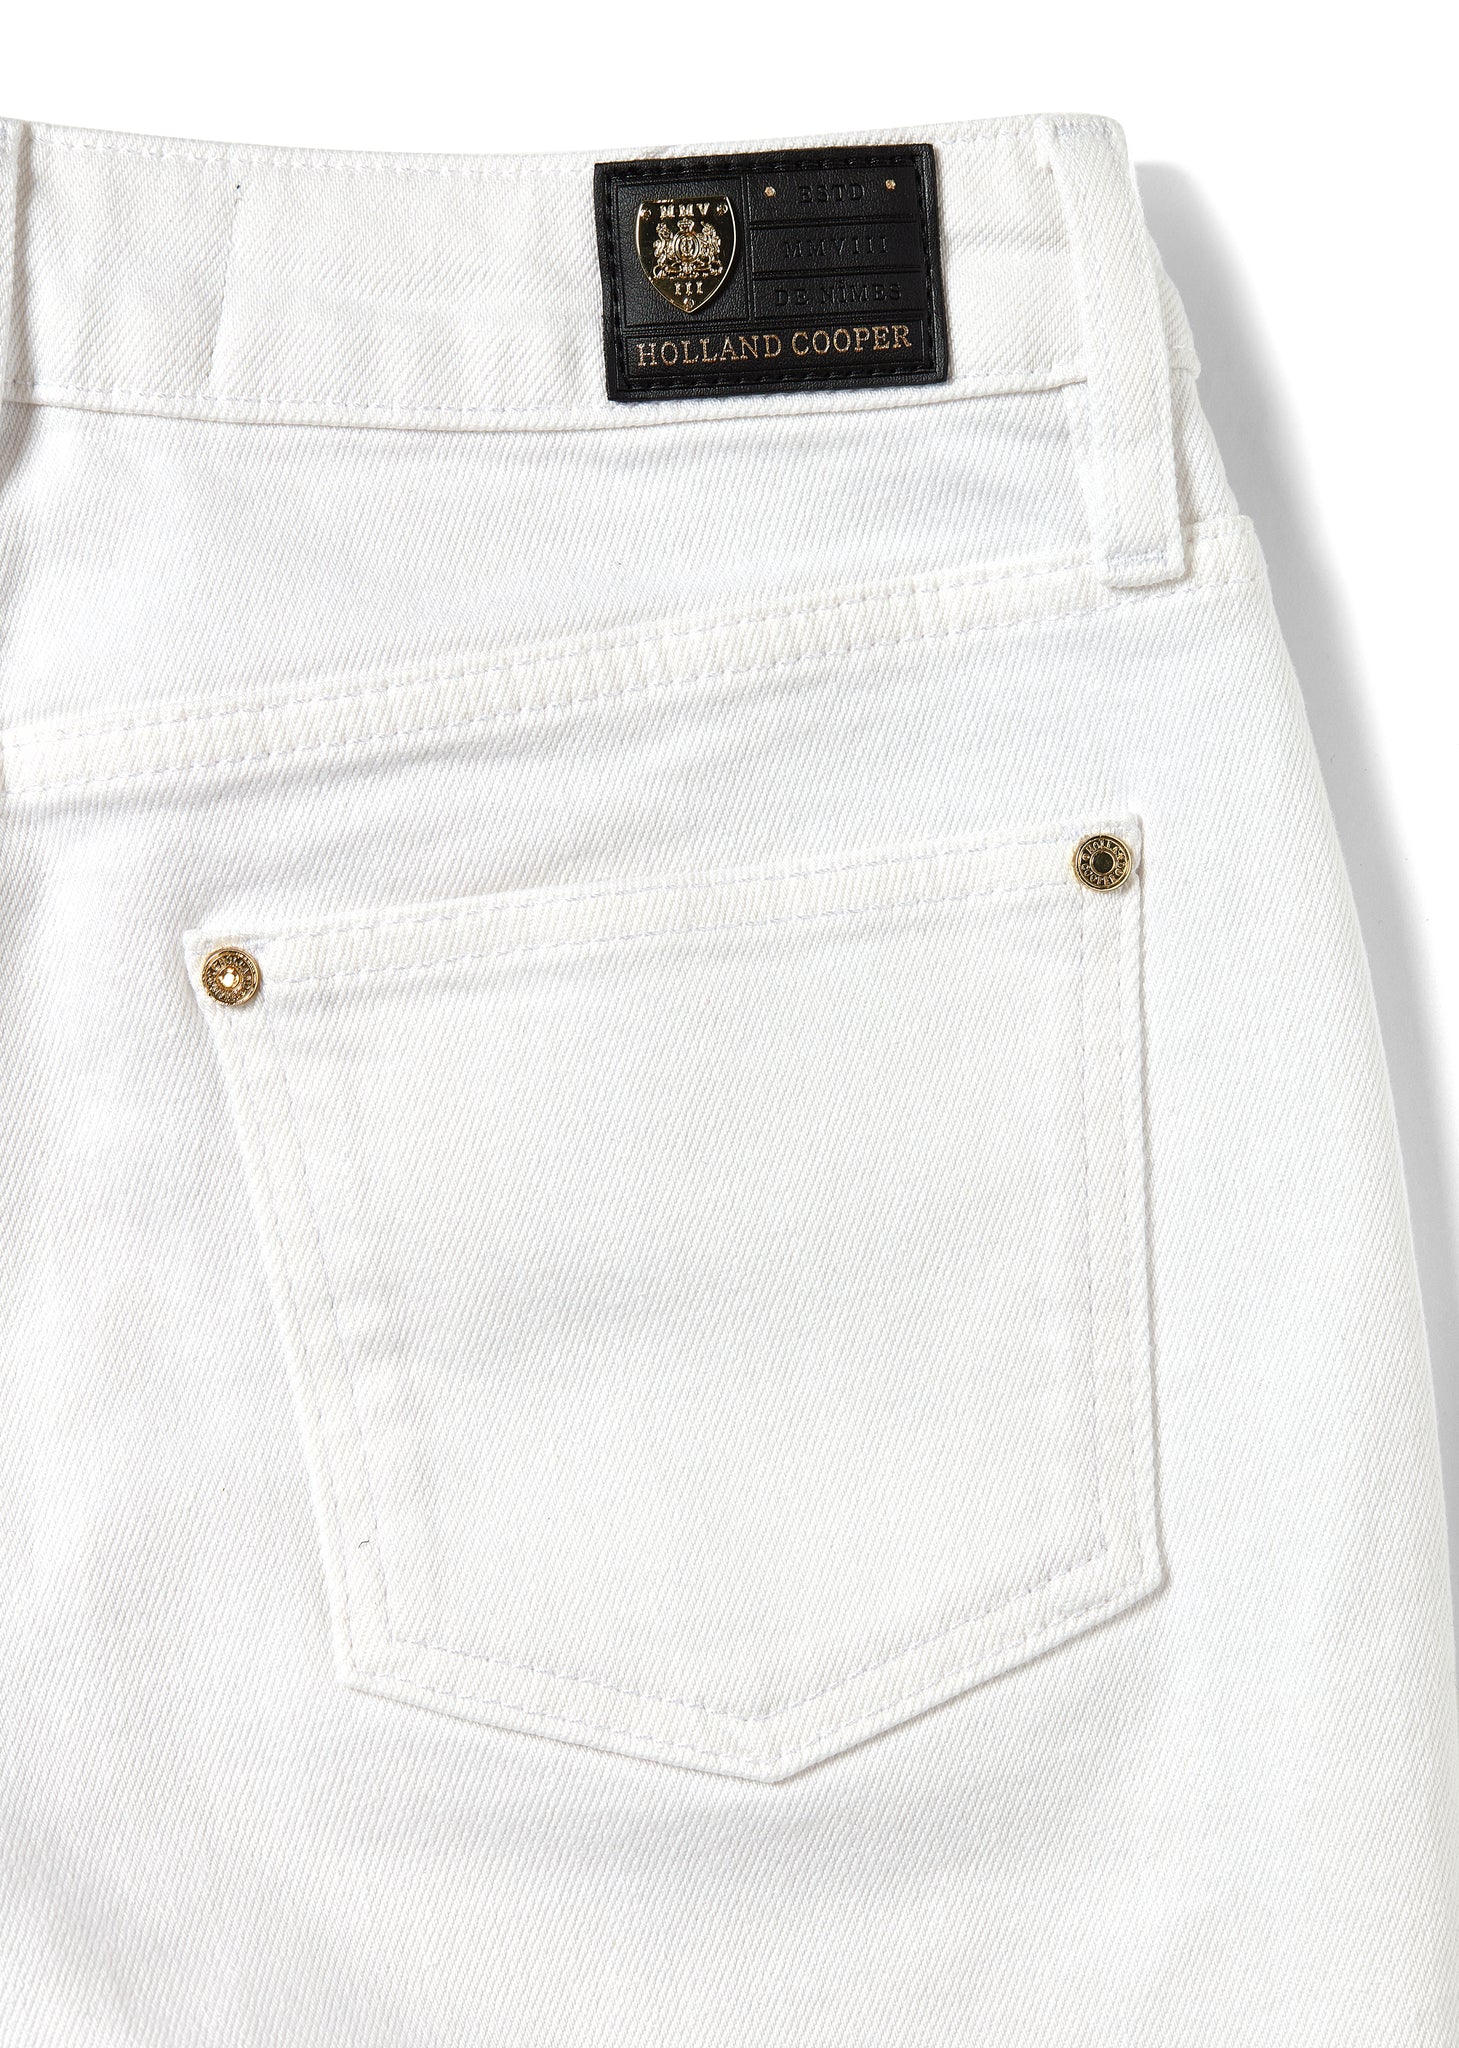 back pocket detail of womens white high waisted denim shorts with raw edge hemline and two open front pockets and two open back pockets with gold hc crest rivet in right front pocket